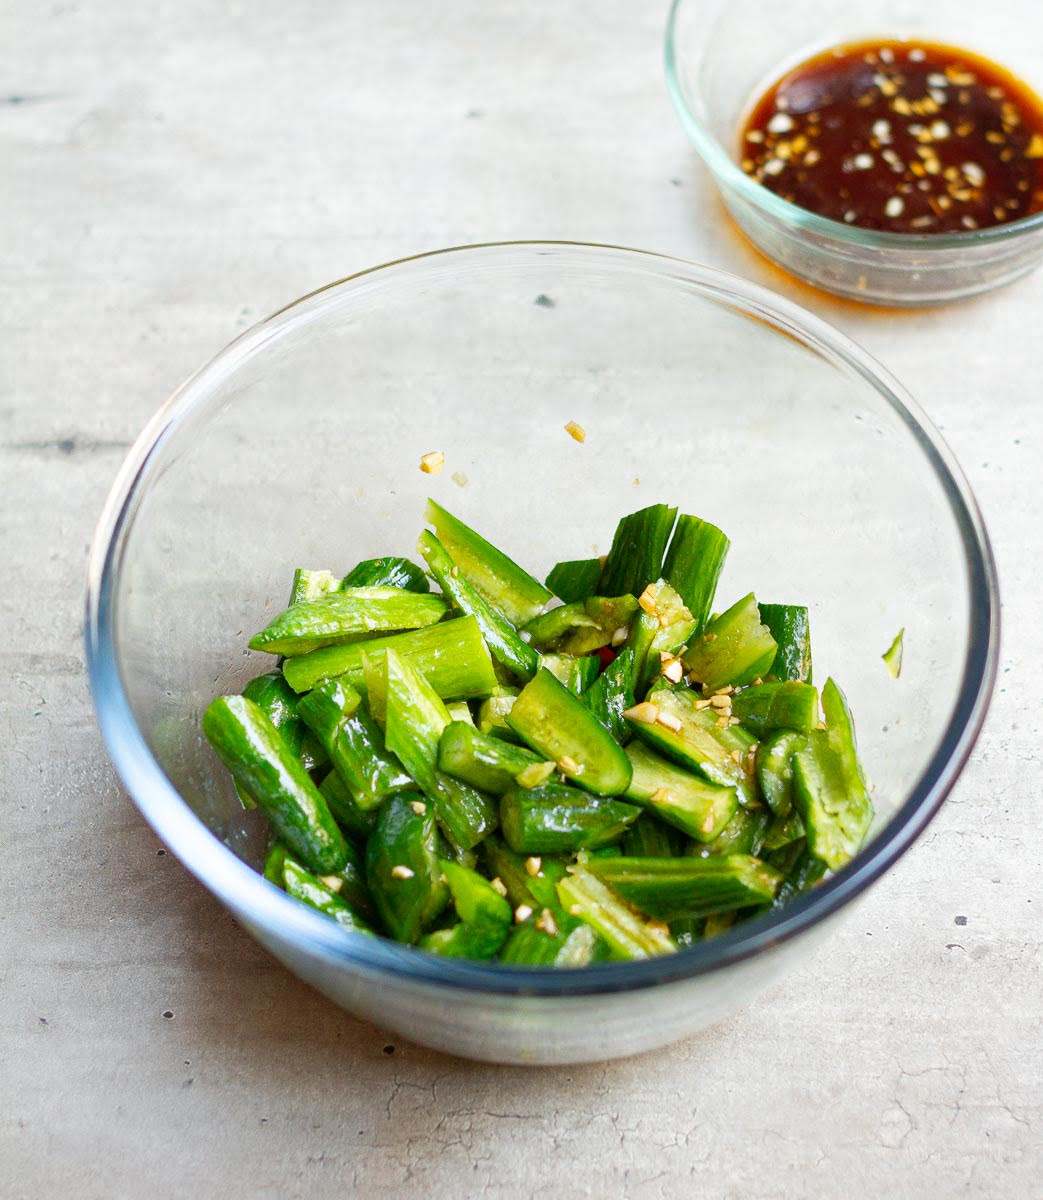 Mix the smashed cucumbers with the dressing